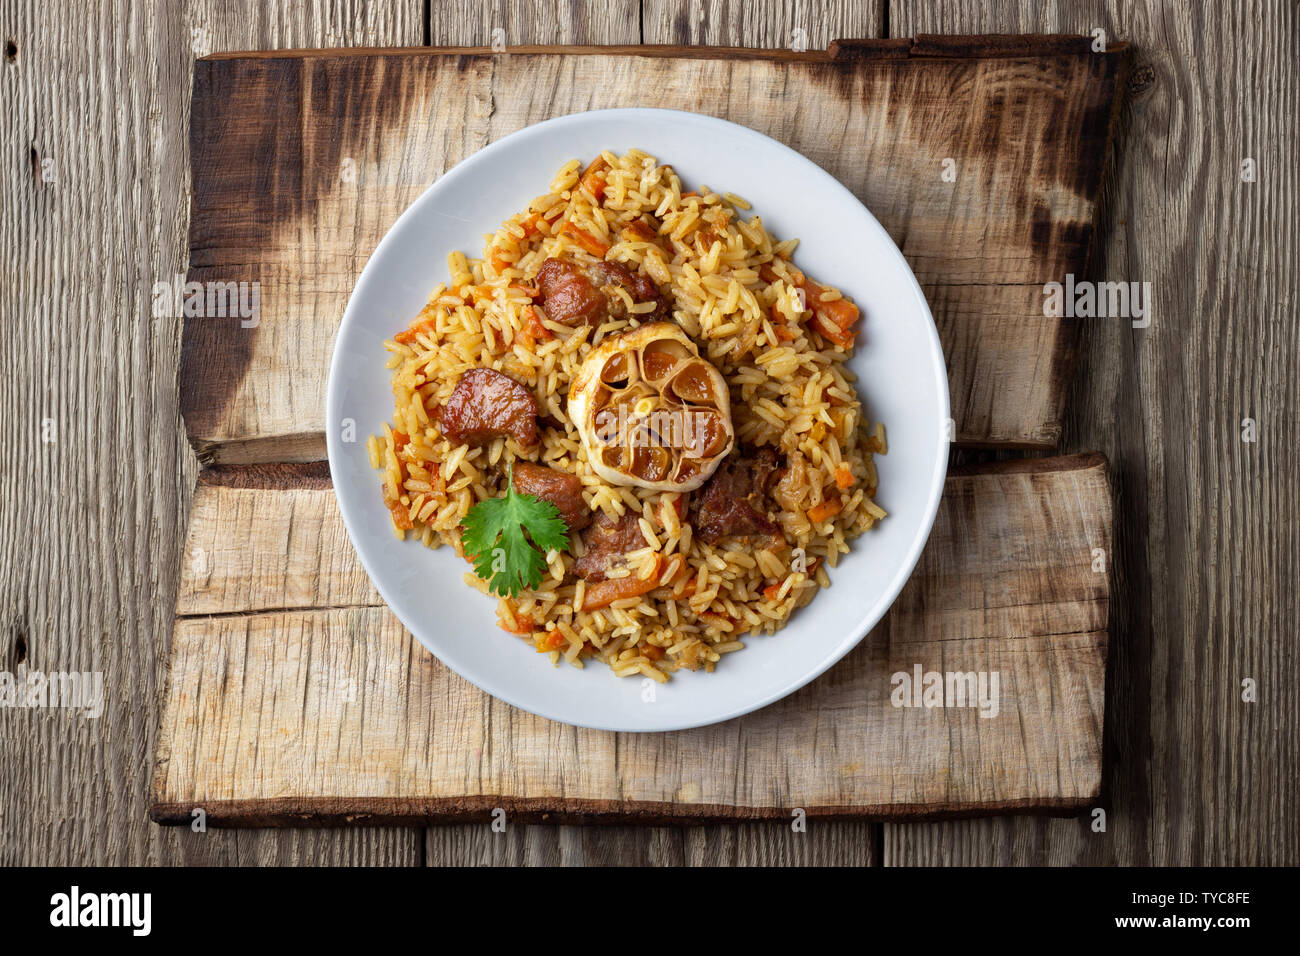 Oriental cuisine. Uzbek pilaf or plov from rice and meat. Wooden rustic background. Top view vith copy space. Stock Photo